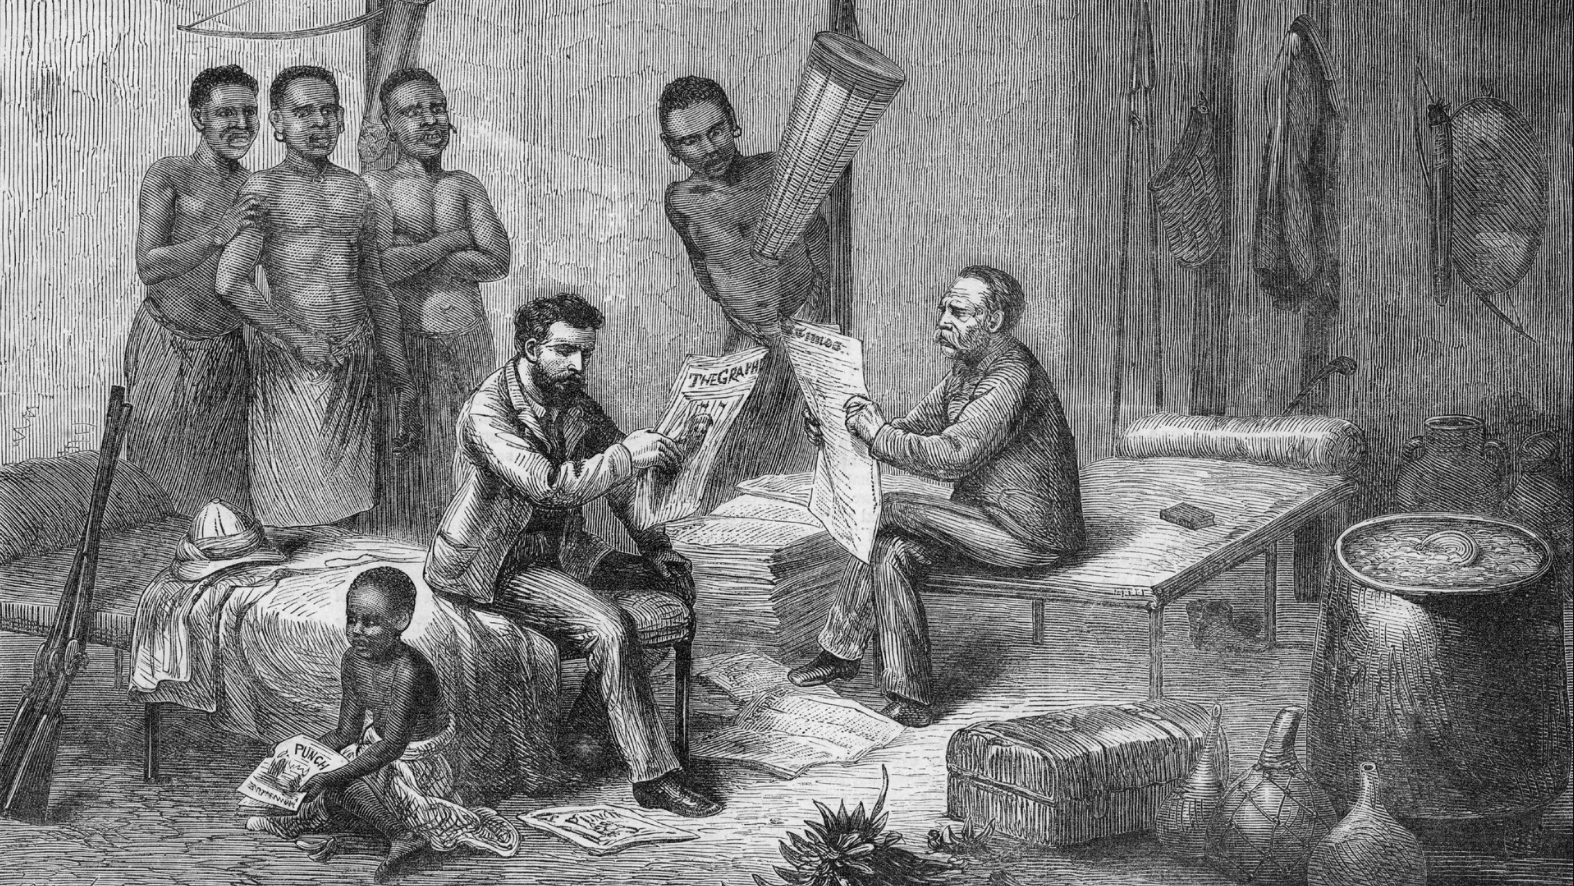 Illustration - David Livingstone and Henry Stanley are depicted reading newspapers during an expedition in central Africa; links to news story